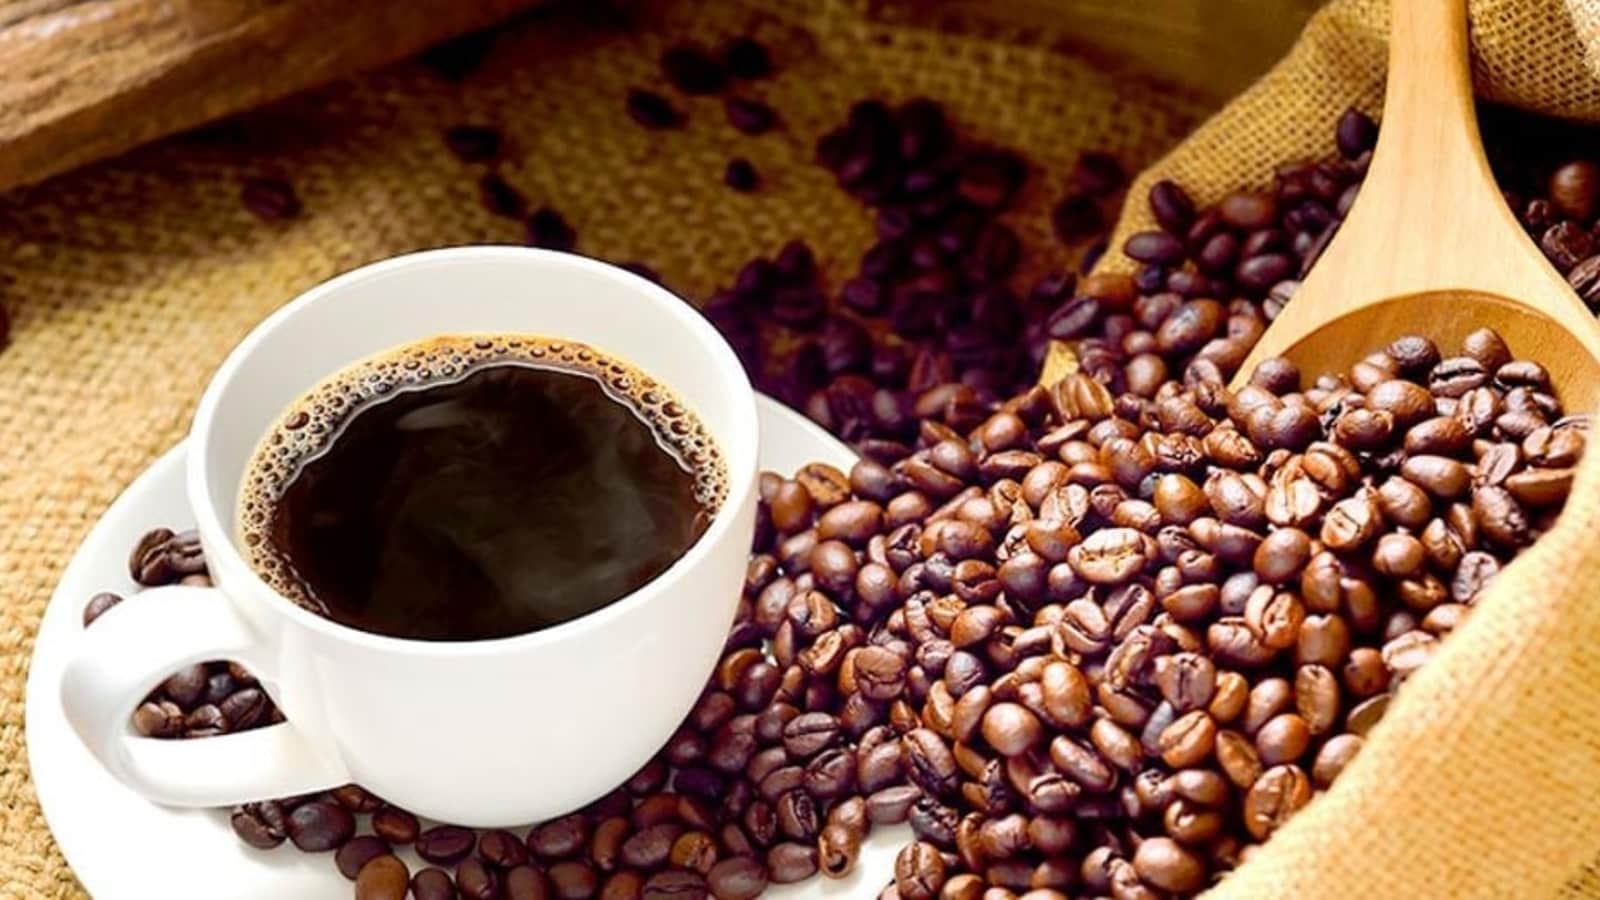 Is your coffee giving you cancer? Here’s what a cancer surgeon has to say | Health